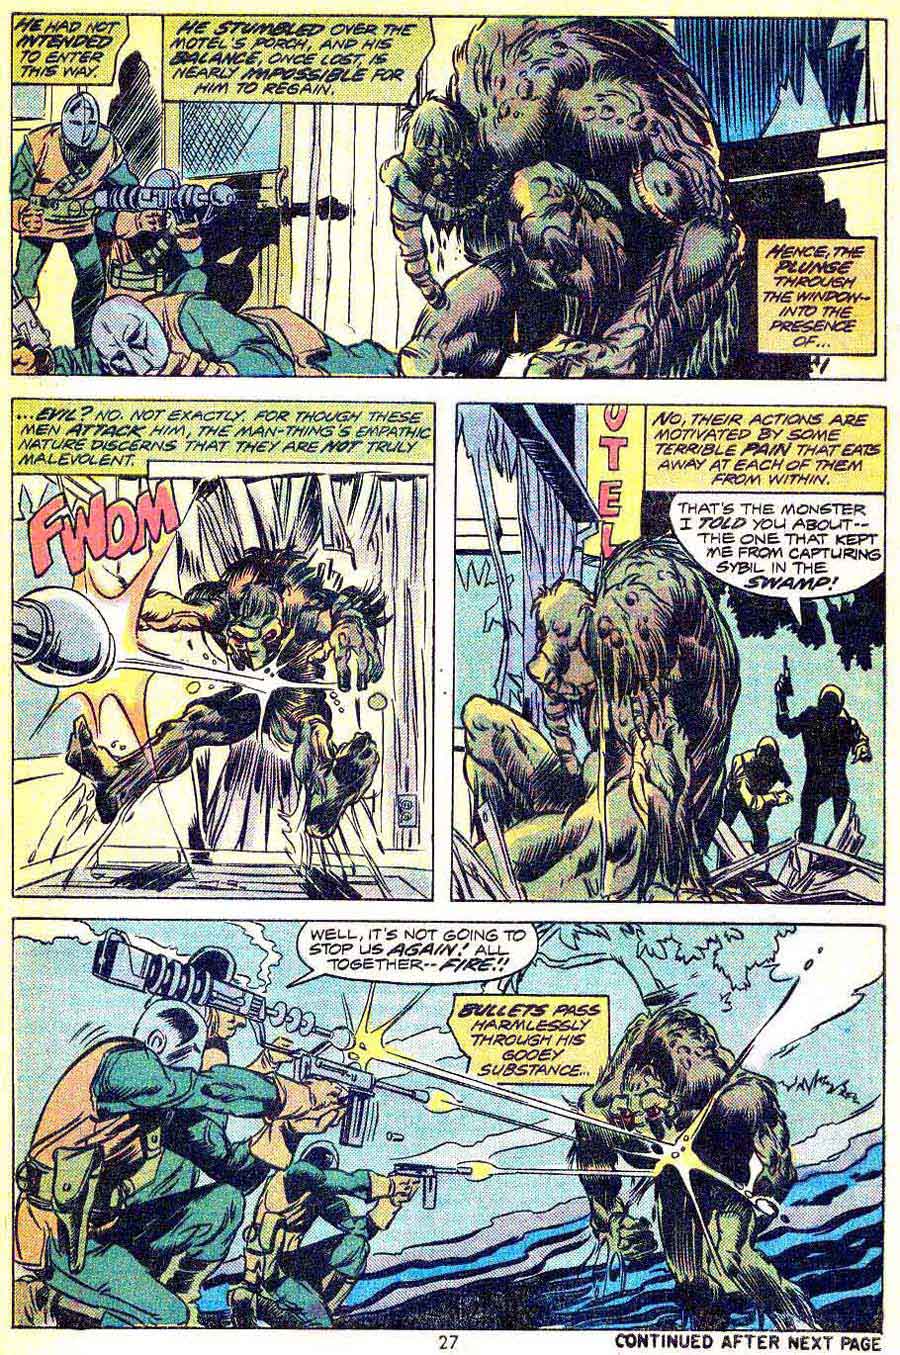 Man-Thing v1 #11 marvel 1970s bronze age comic book page art by Mike Ploog